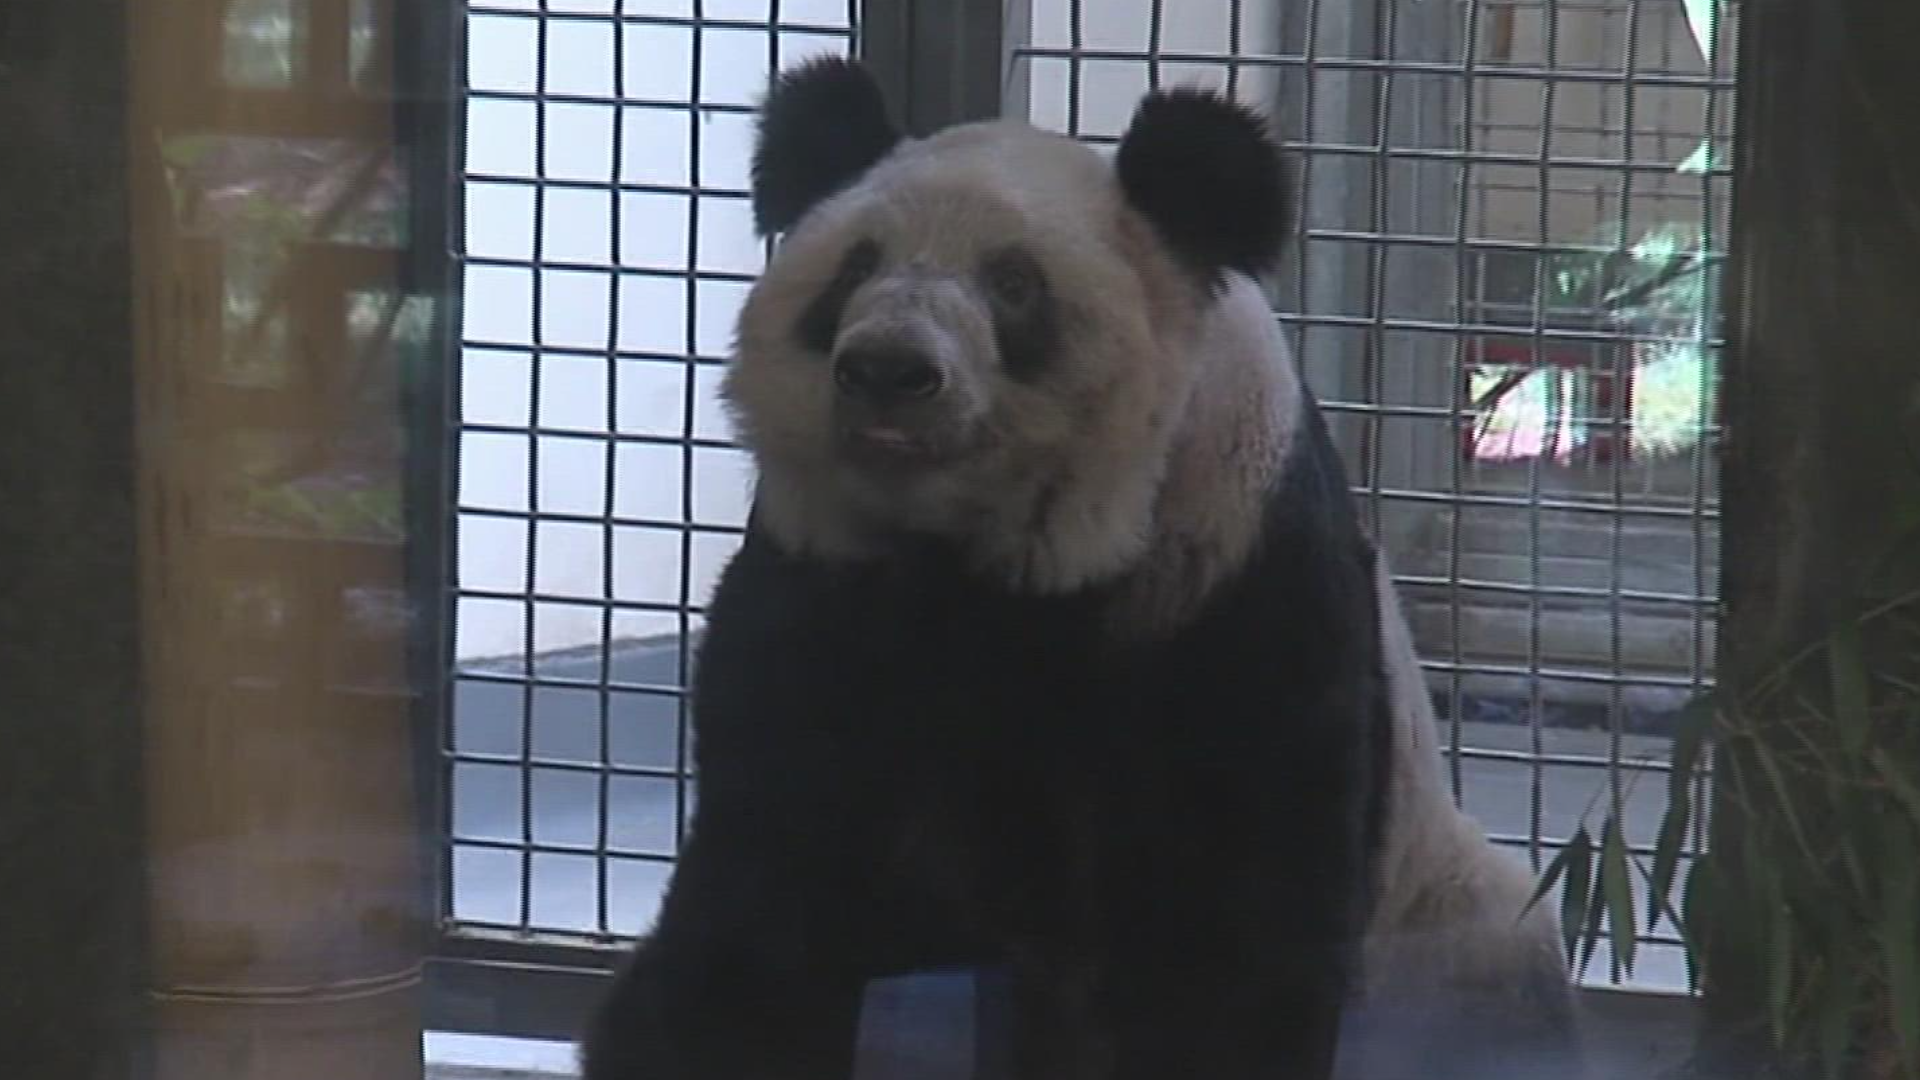 The pop superstar made headlines Tuesday when she expressed support for a movement to have Memphis Zoo pandas Le Le and Ya Ya returned to China.